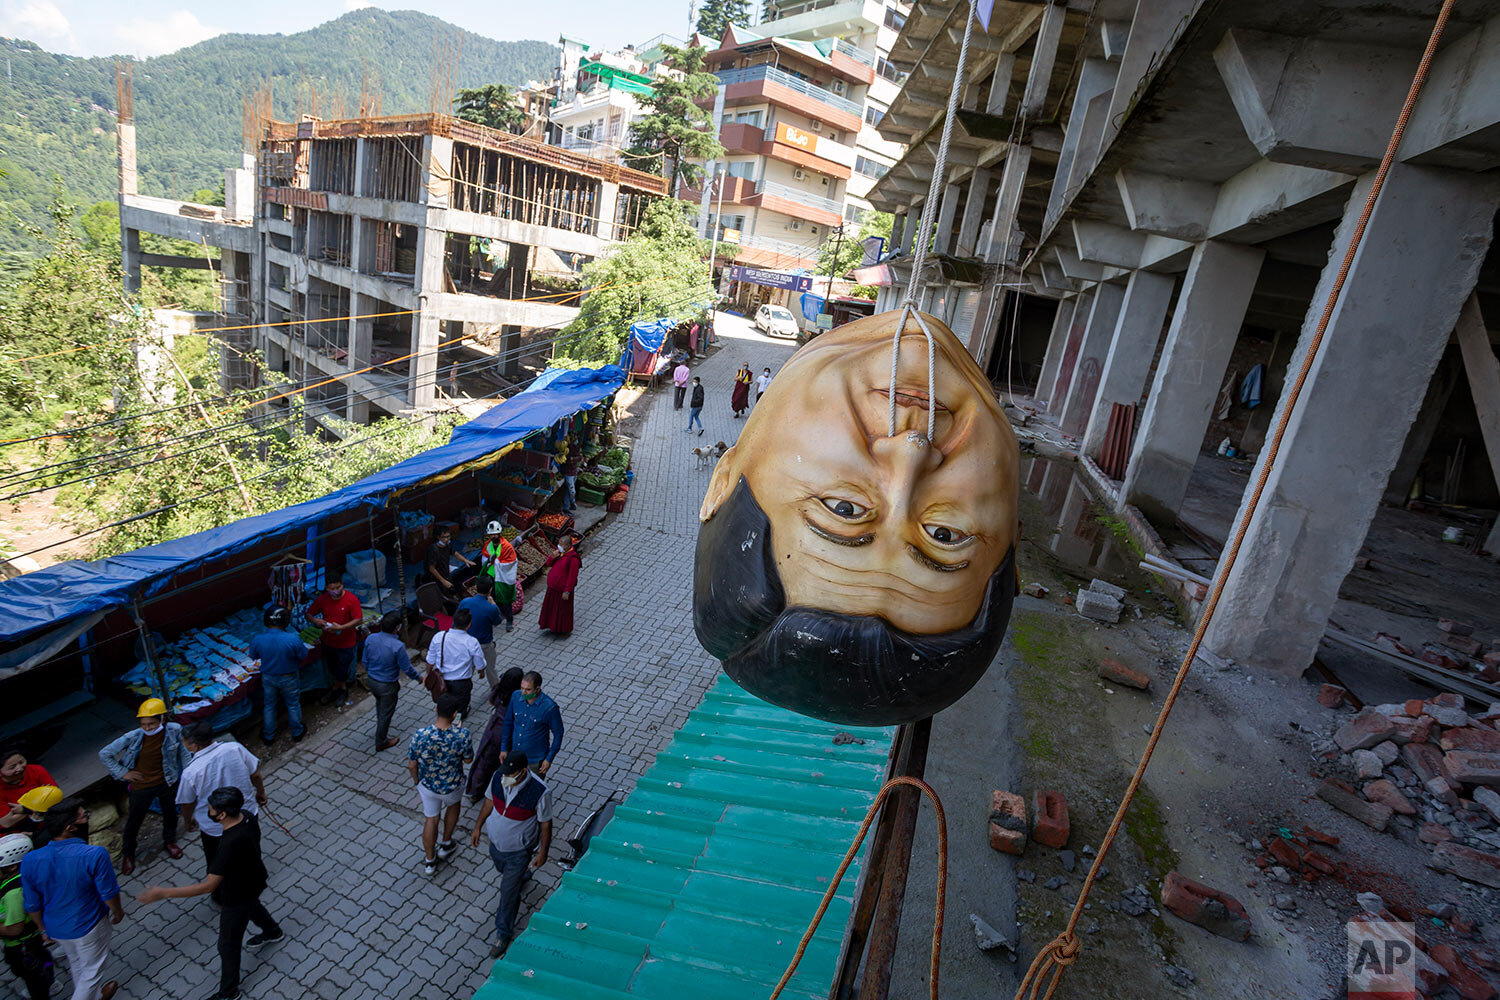  A model head in the likeness of Chinese President Xi Jinping is hung upside down from a building by Tibetan activists during a protest in Dharmsala, India, Thursday, July 23, 2020. (AP Photo/Ashwini Bhatia) 